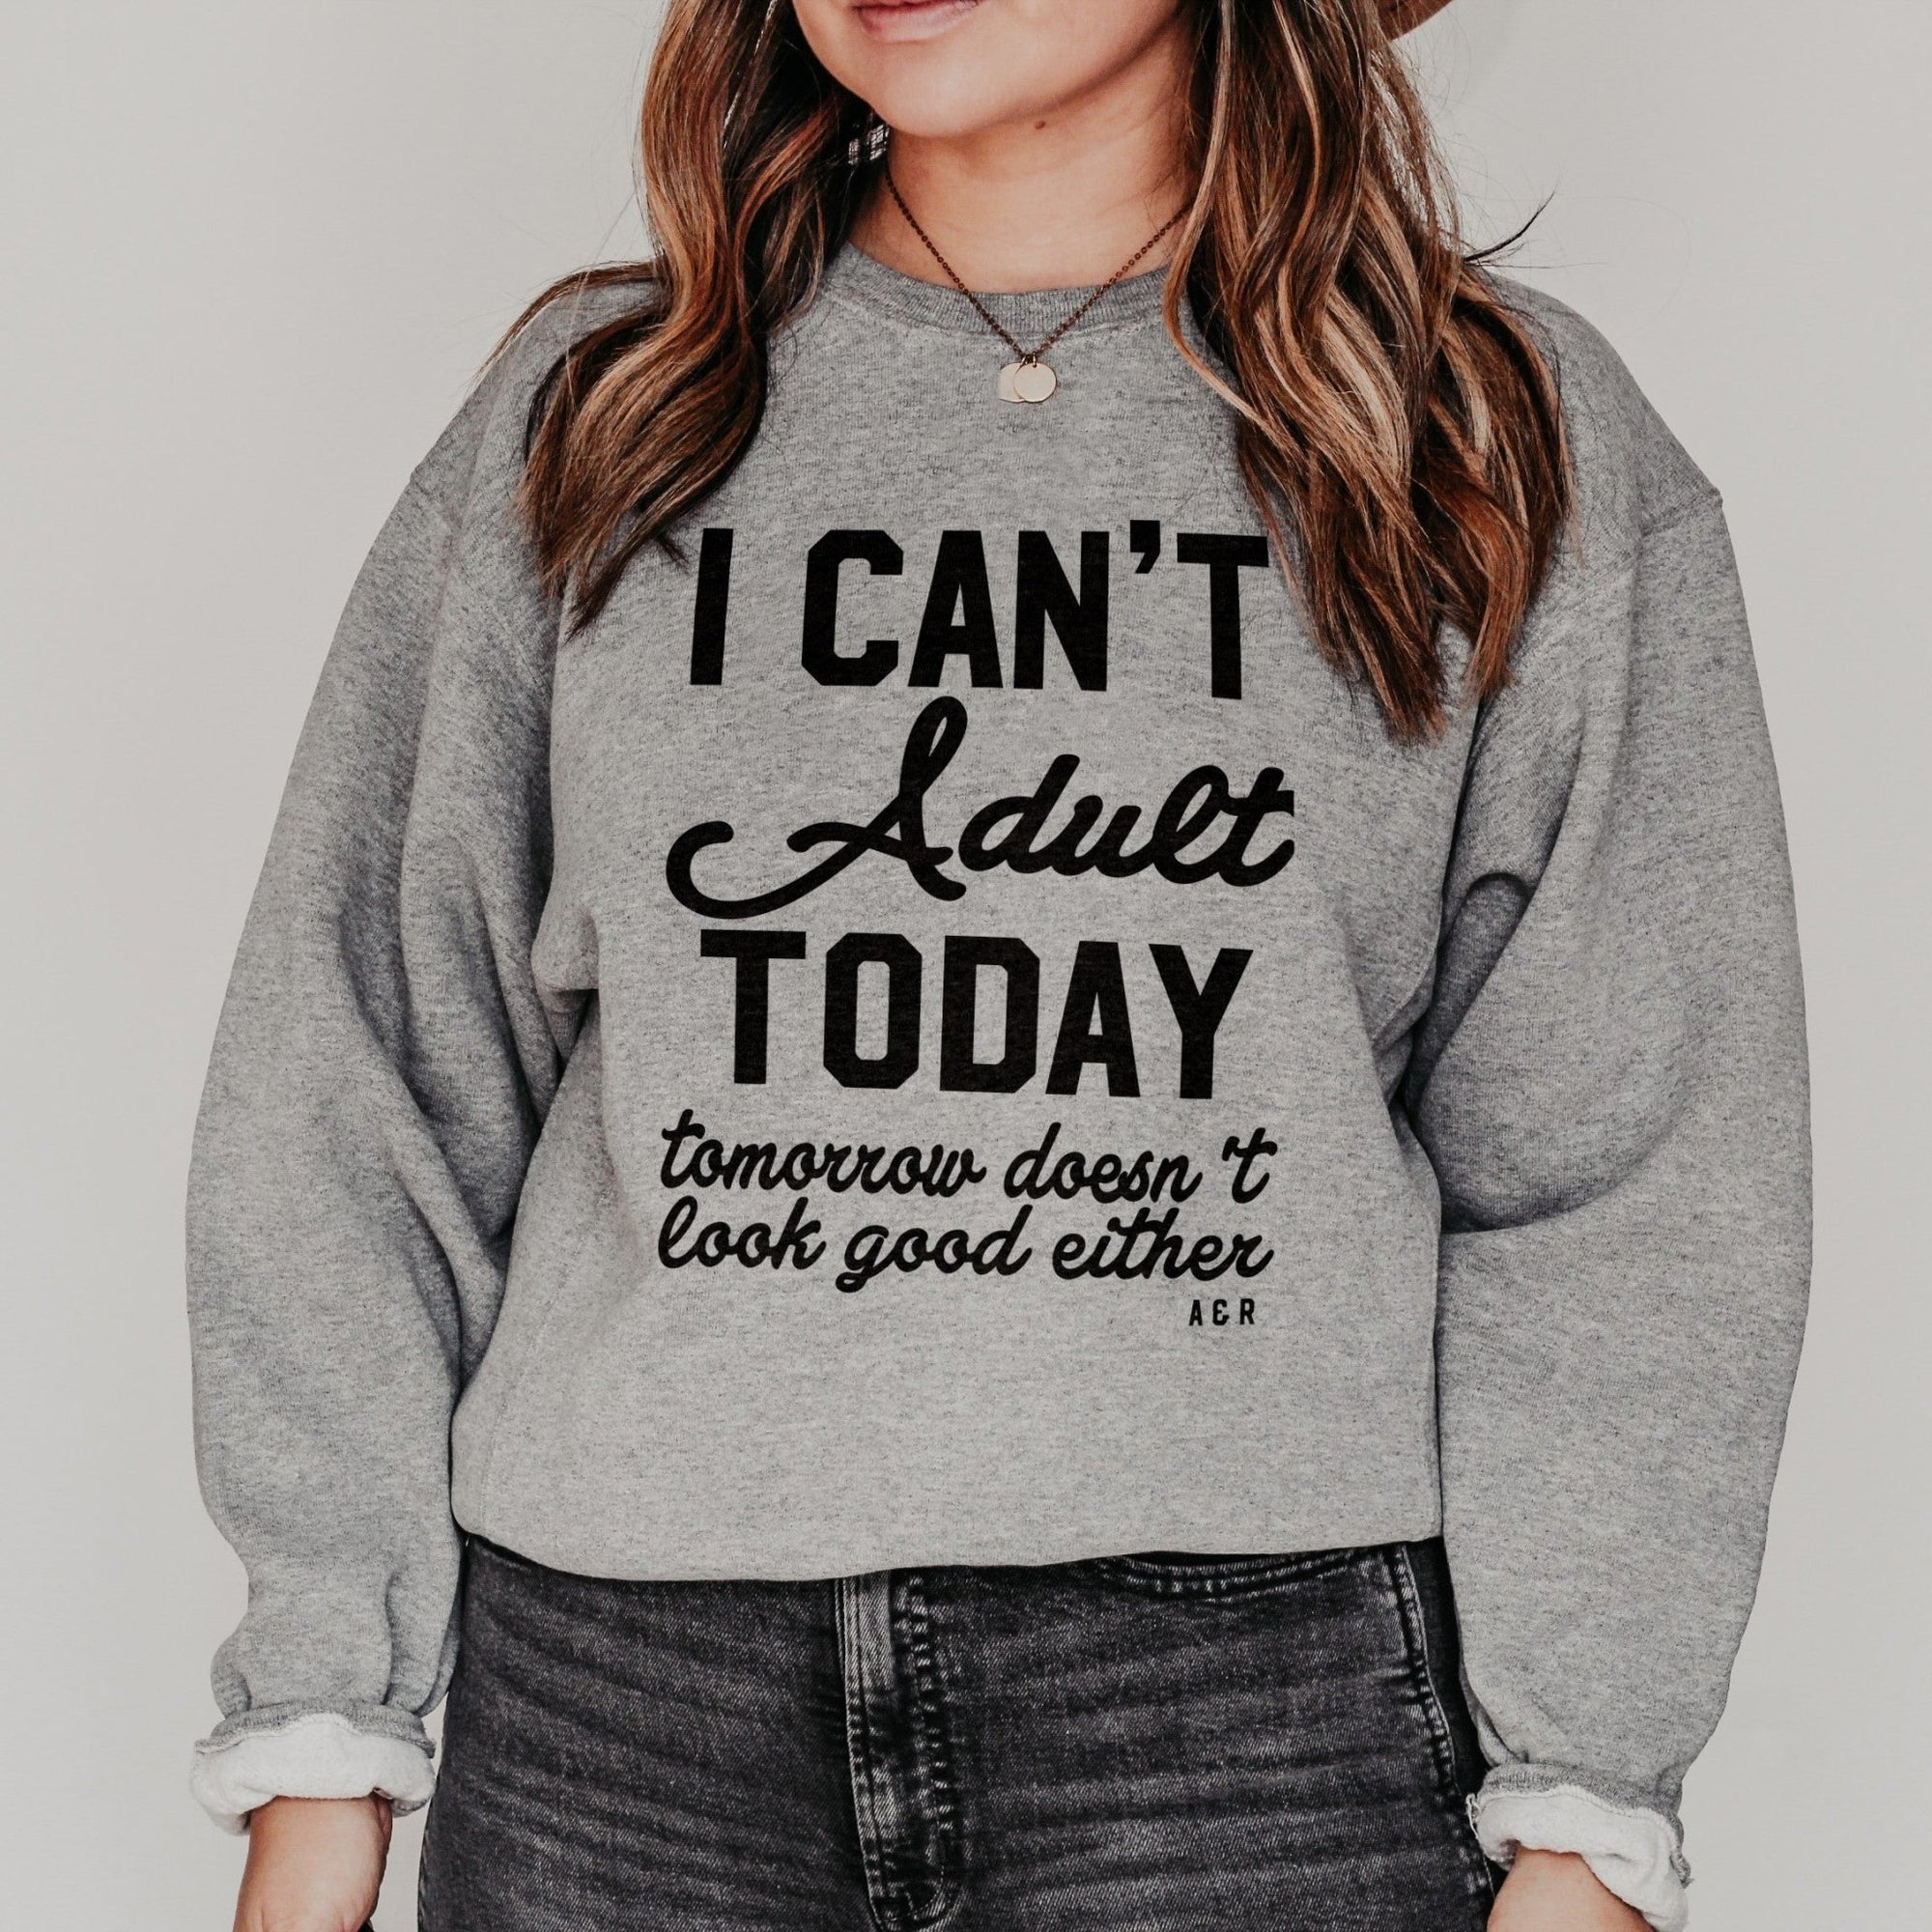 I Can't Adult Today Crewneck Sweatshirt - Final Sale - Alley & Rae Apparel